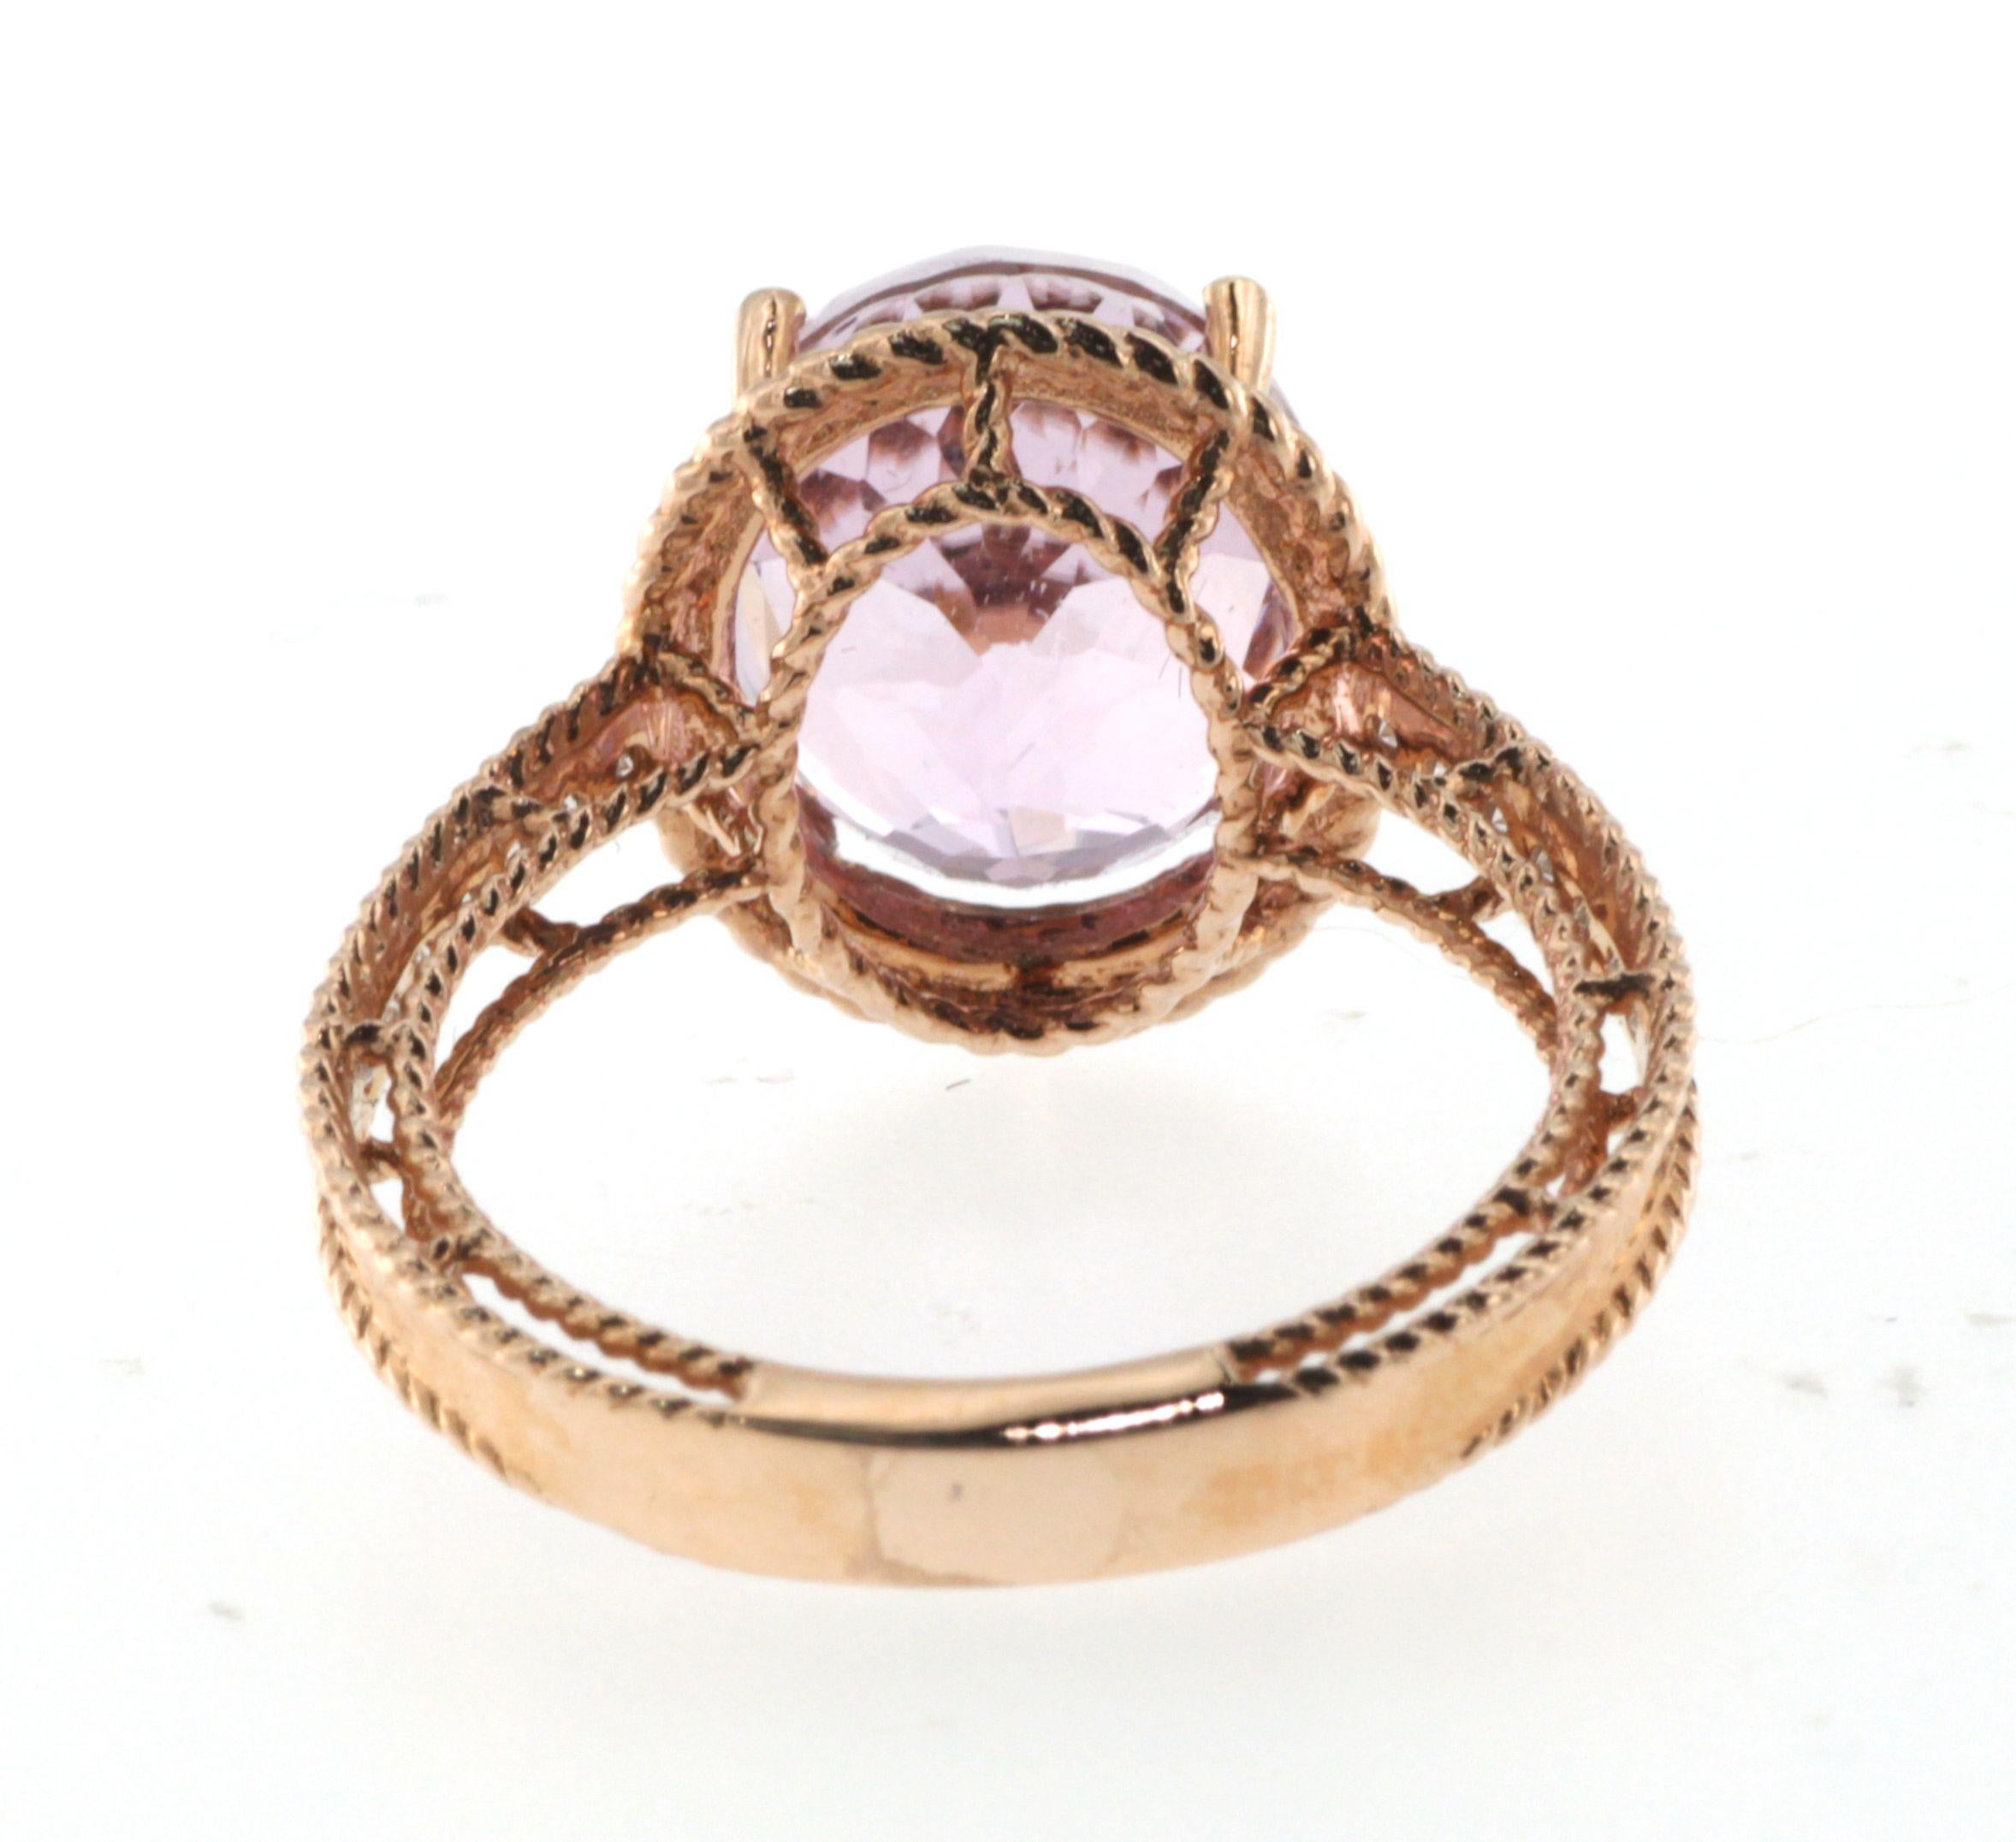 This ring features a 6.40 carats kunzite, assented with 0.14 carat of white round diamonds on the shoulder. Ring is set in 14 karat rose gold. The gold is made in a twisted-bead finishing. 
US 6.5
Resizing is available
Kunite 6.40 carats
White Round